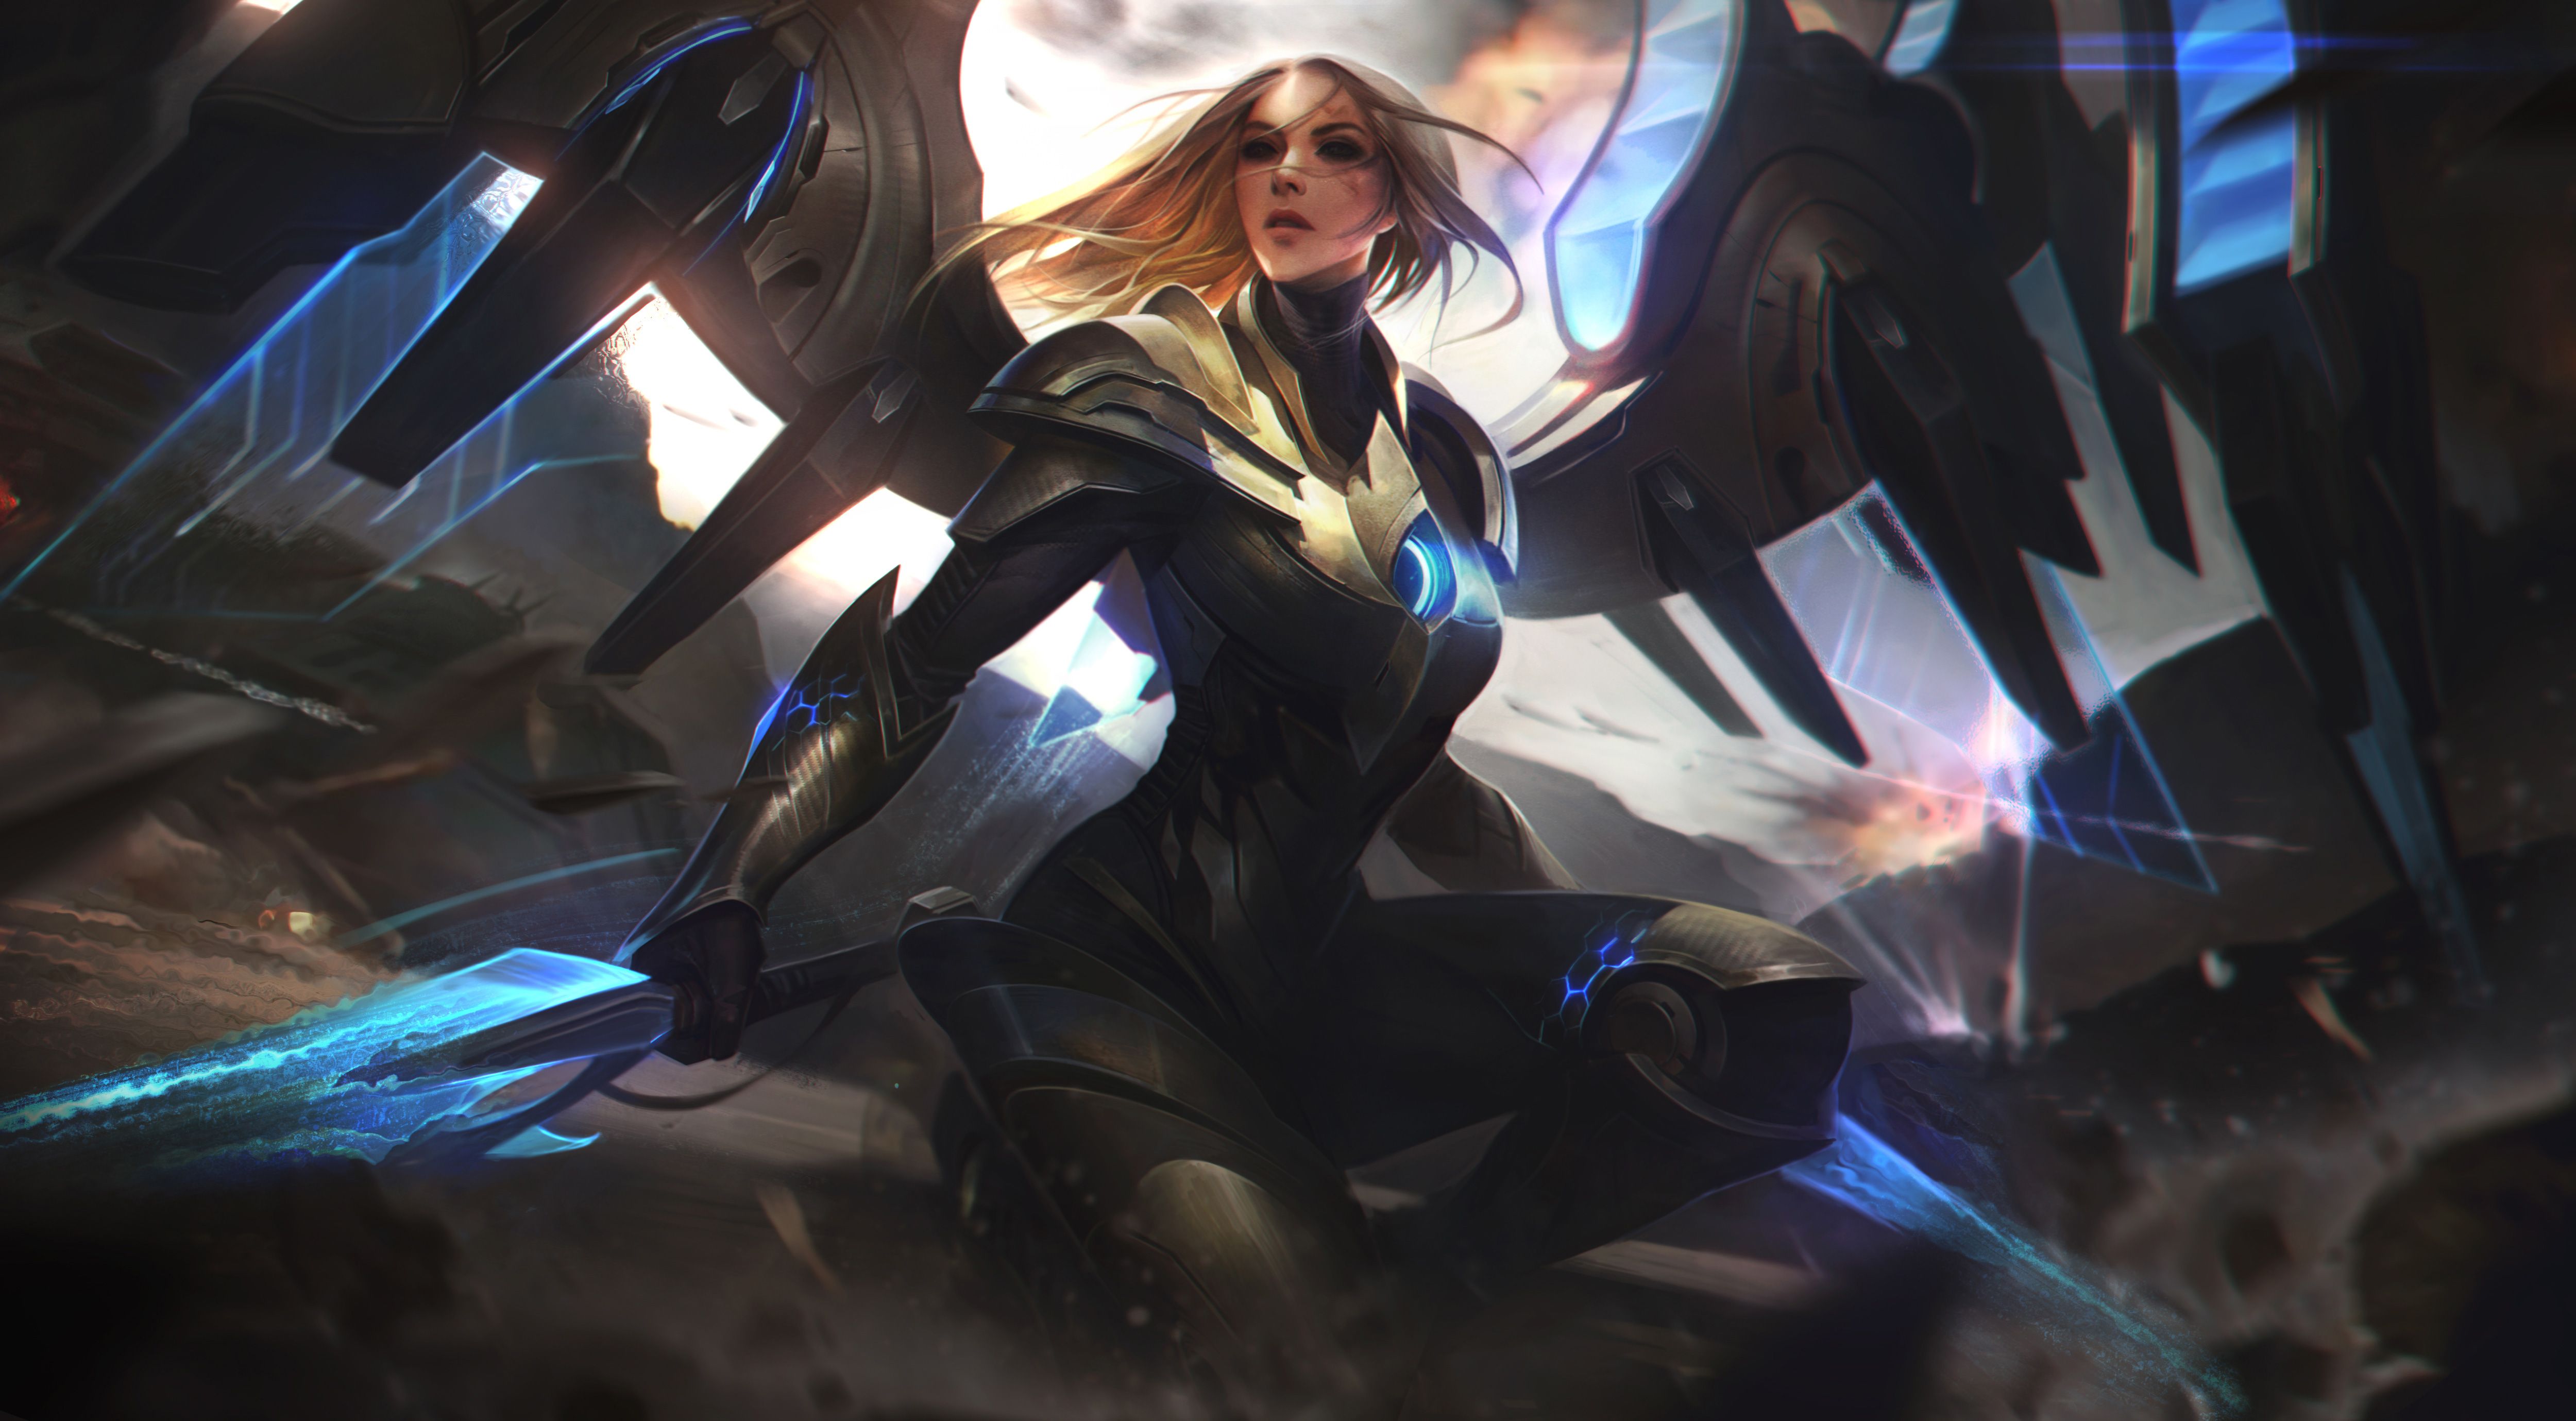 Aether Wing Kayle 4k Ultra HD Wallpaper. Background Image